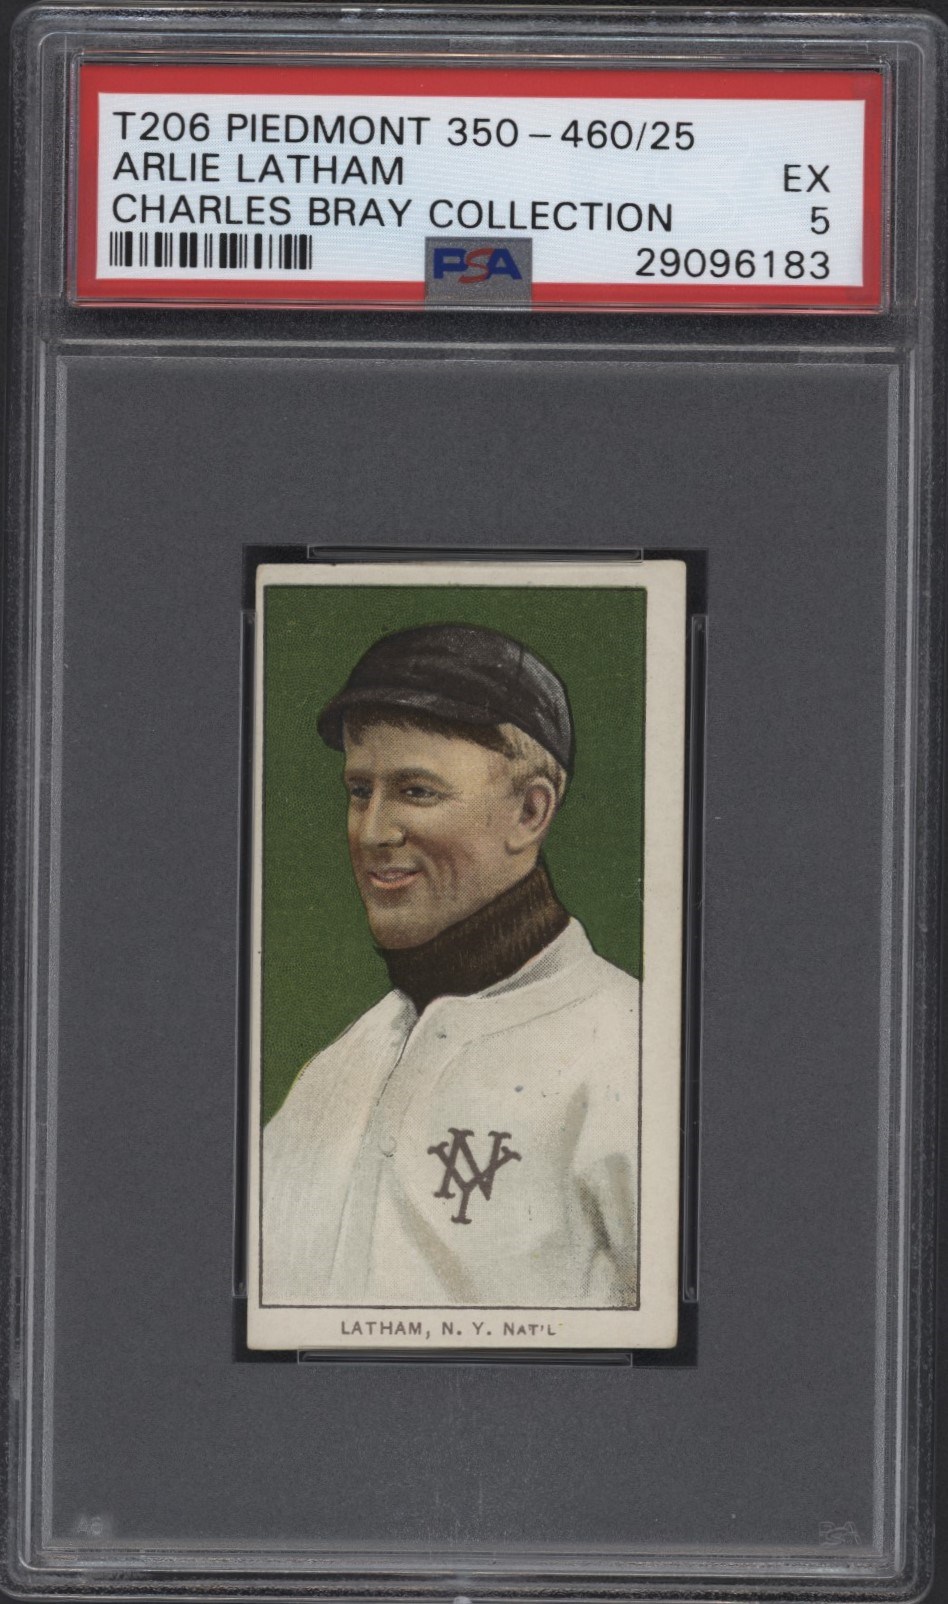 T206 Piedmont 350-460/25 Arlie Latham PSA 5 From the Charles Bray Collection